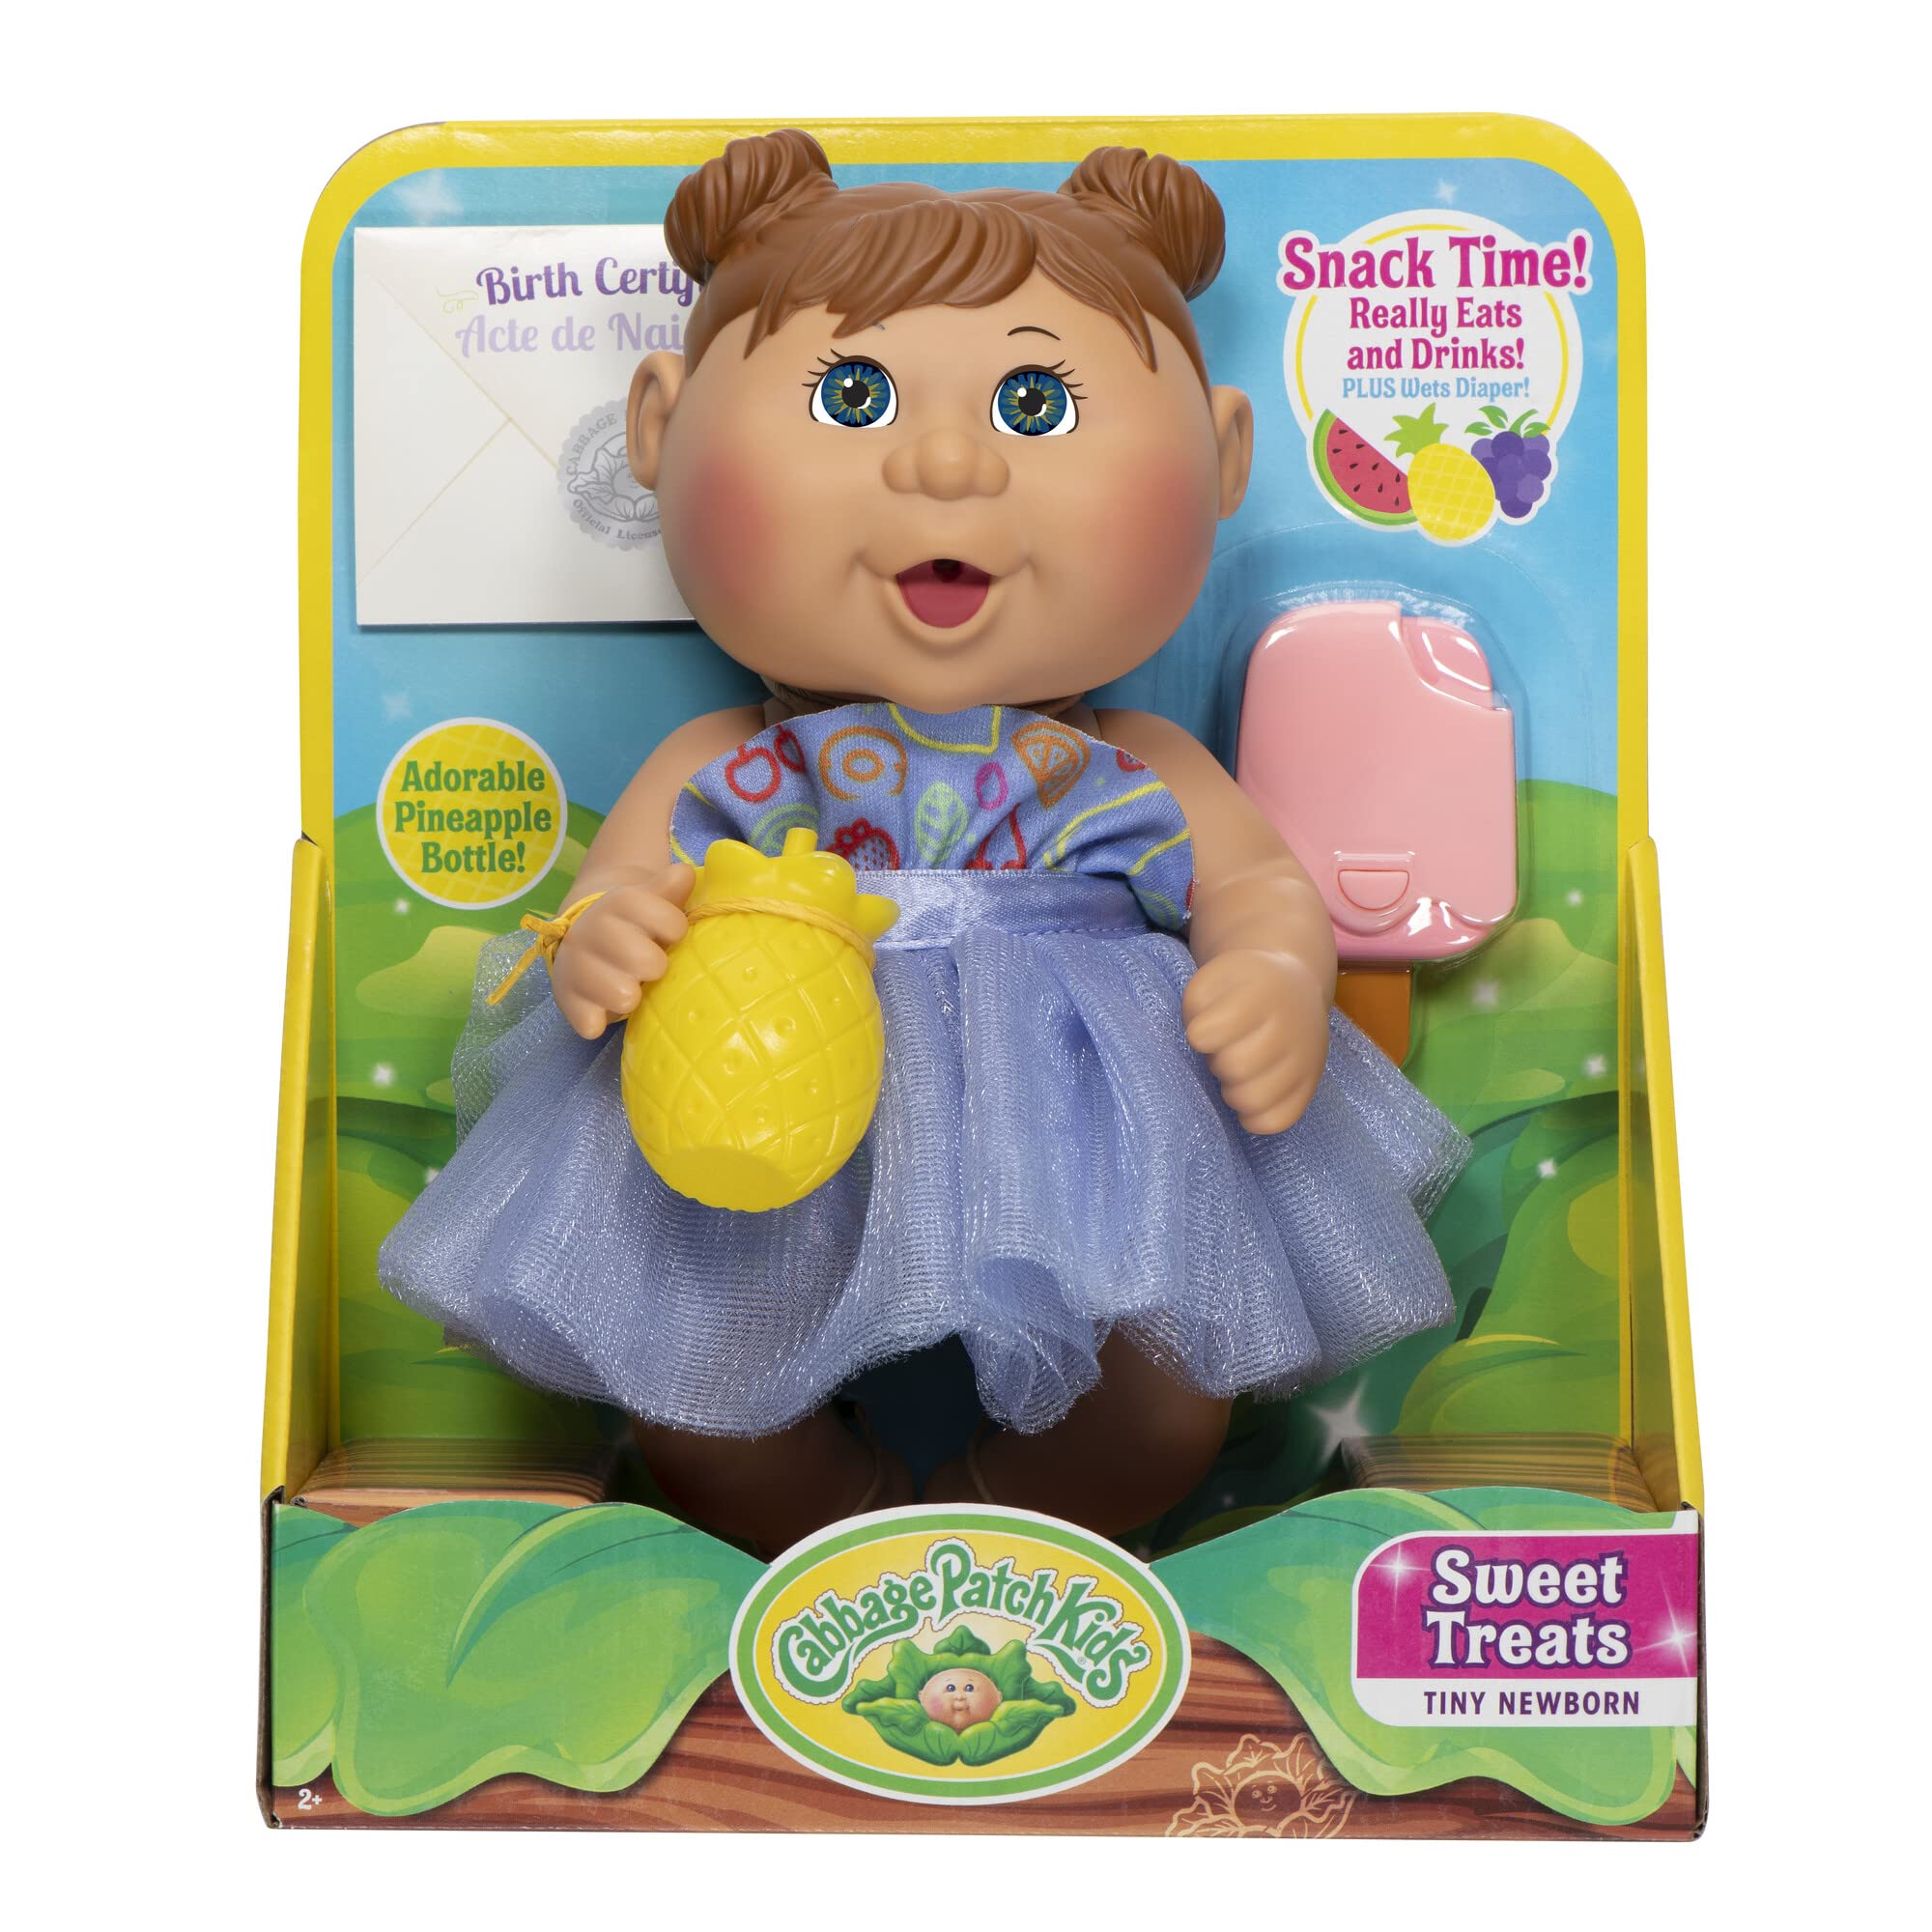 Cabbage Patch Kids Deluxe Tiny Newborn - 9 Inch CPK Doll - Sweet Treats (Brunette, Hazel Eyes) - Drink & Wet - Includes Pink Popsicle, Pineapple Bottle, Removable Diaper - Grow Your Cabbage Patch